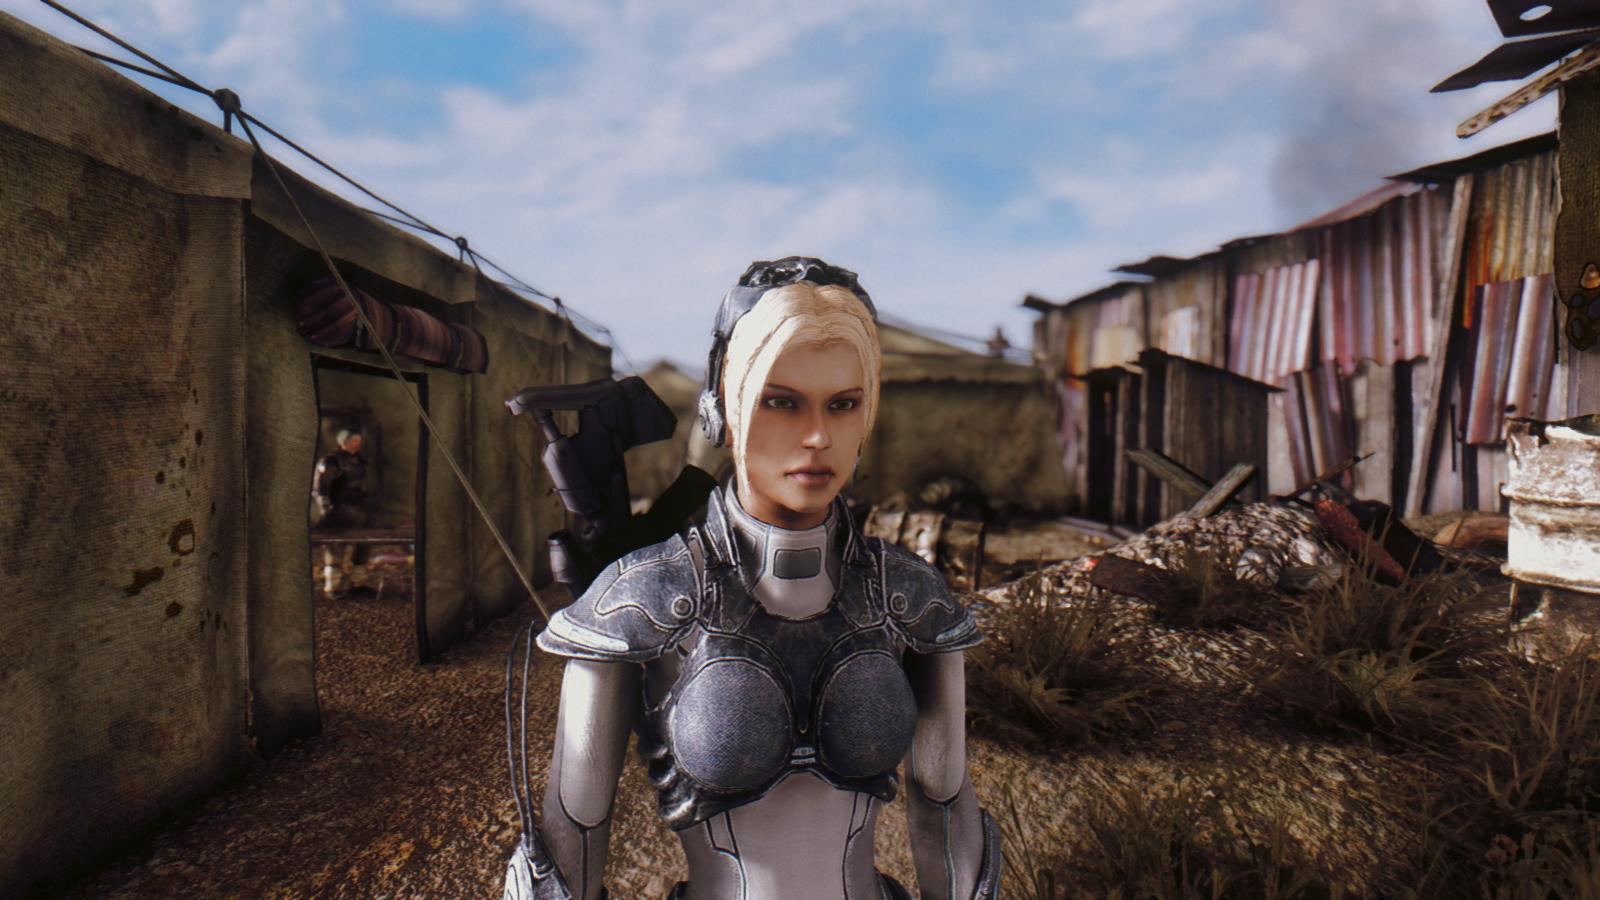 Fallout new enb. Fallout New Vegas daughters of a.r.e.s. Fallout 3 daughters of ares. Fallout NV ares daughter. Оранжерея Аннет фоллаут 76 фото.